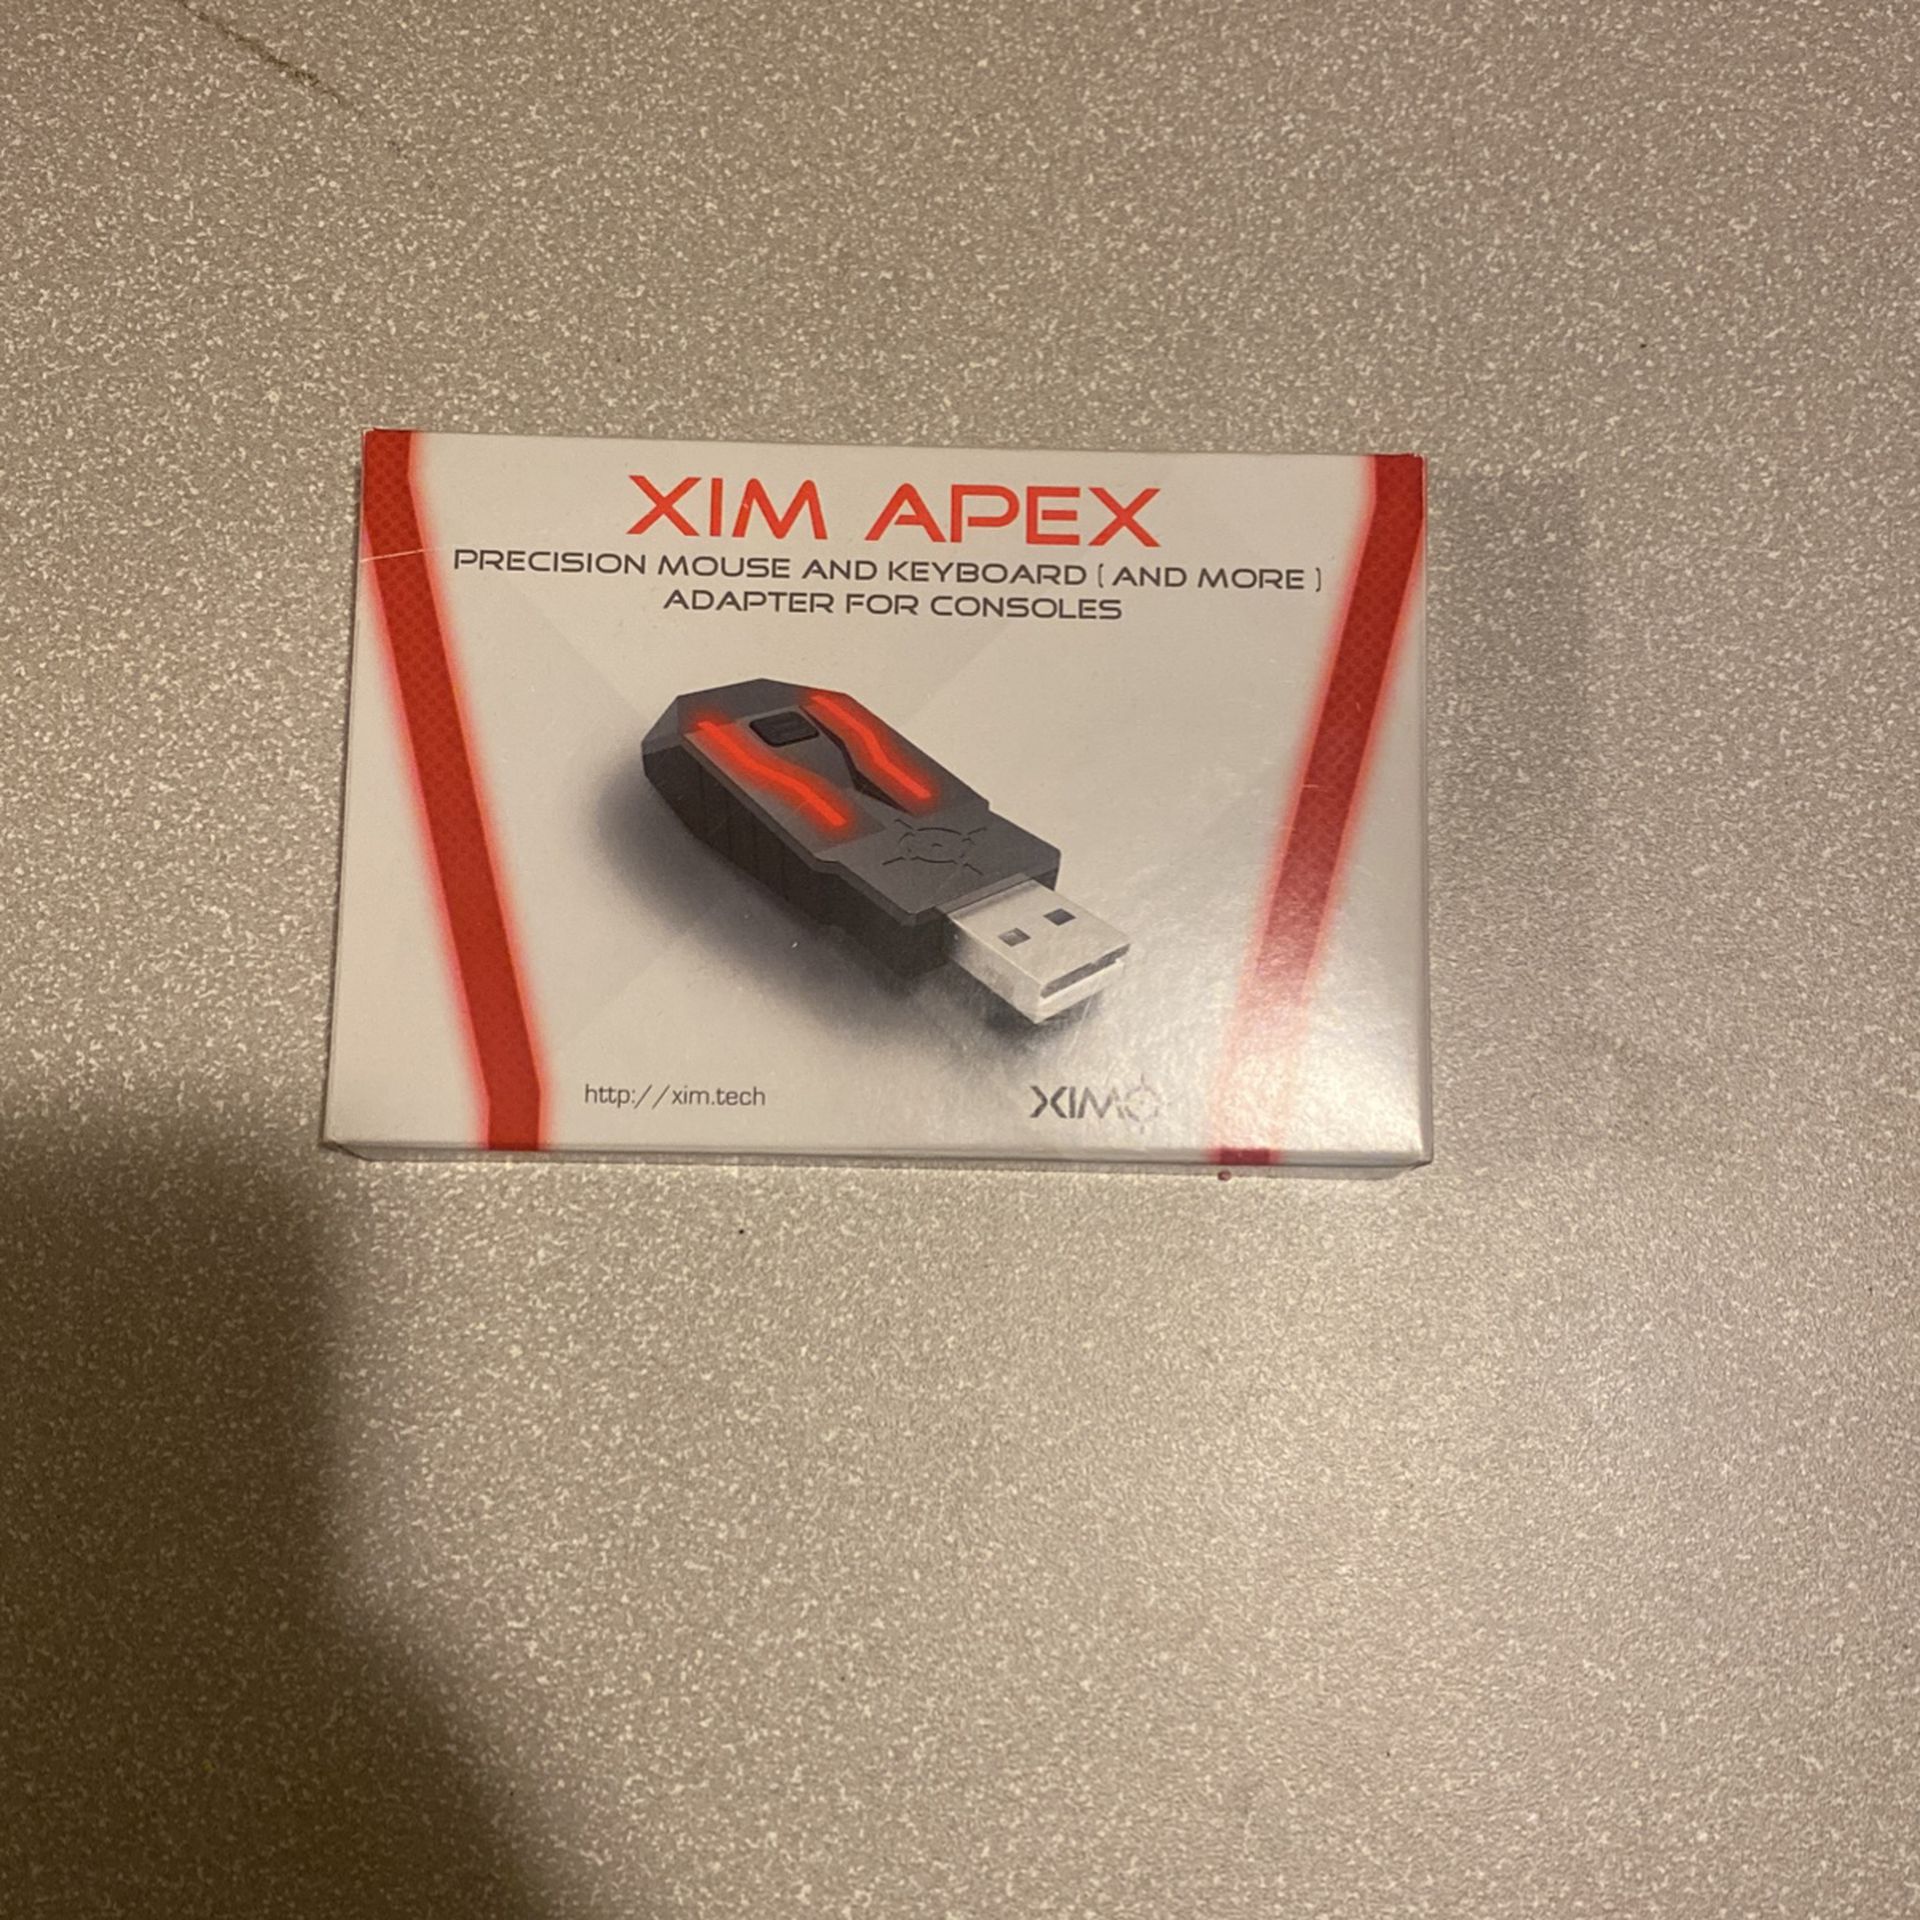 Xim Apex for Sale in Federal Way, WA - OfferUp